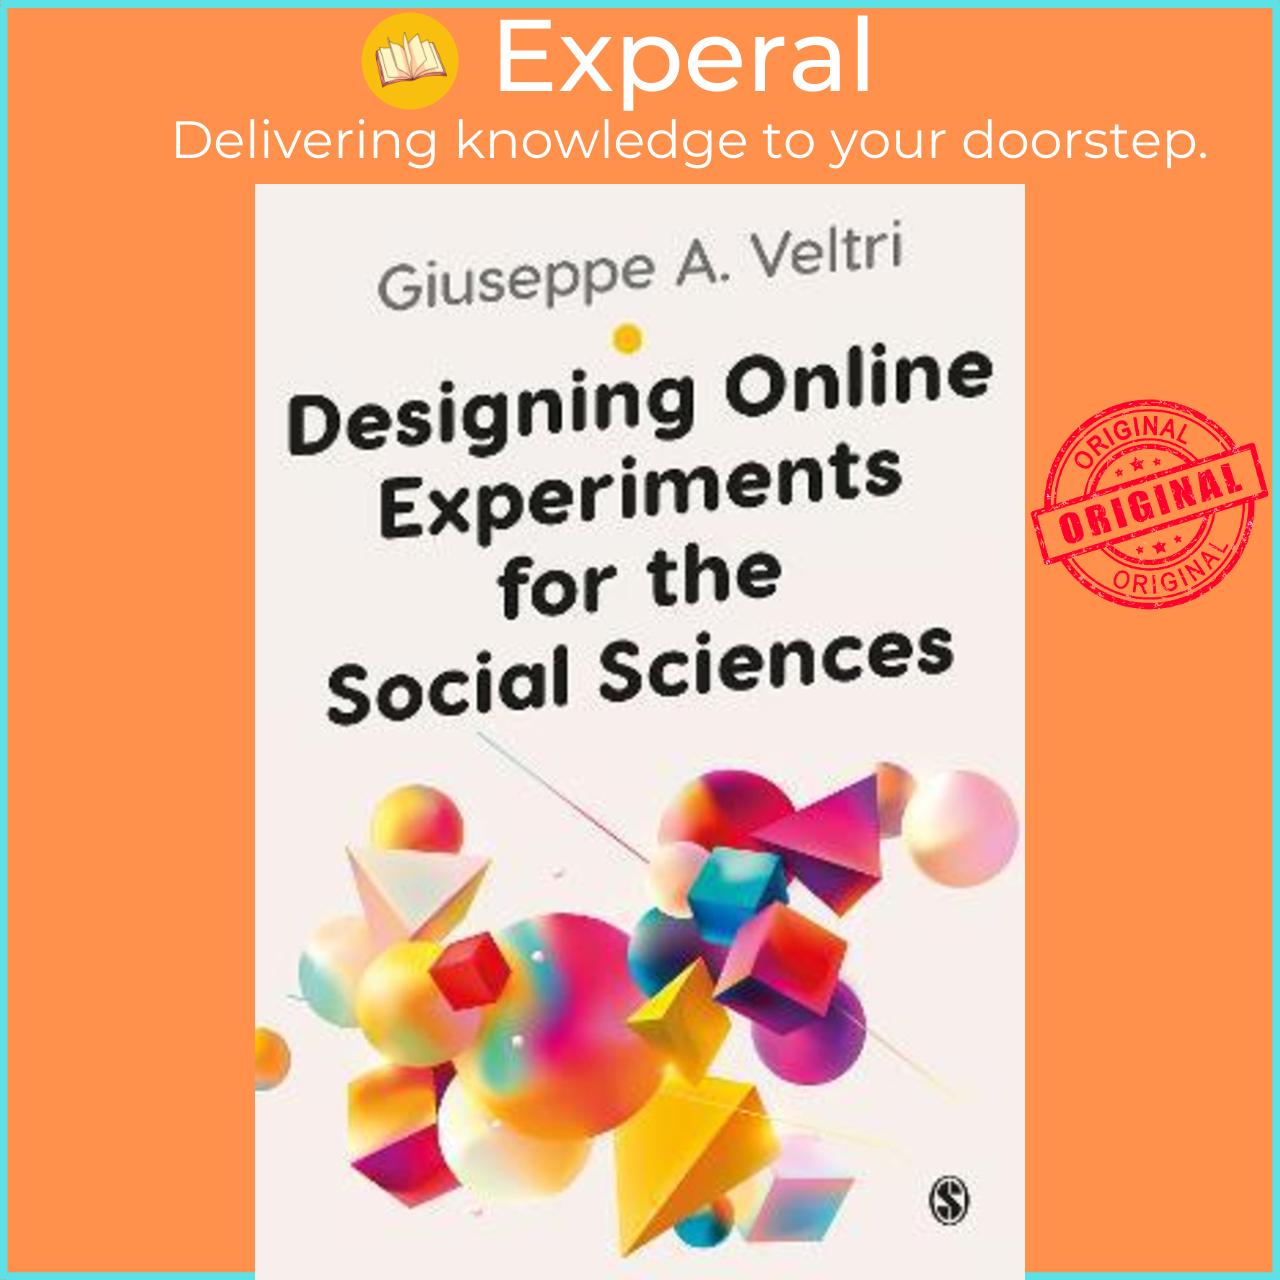 Sách - Designing Online Experiments for the Social Sciences by Giuseppe Veltri (UK edition, paperback)